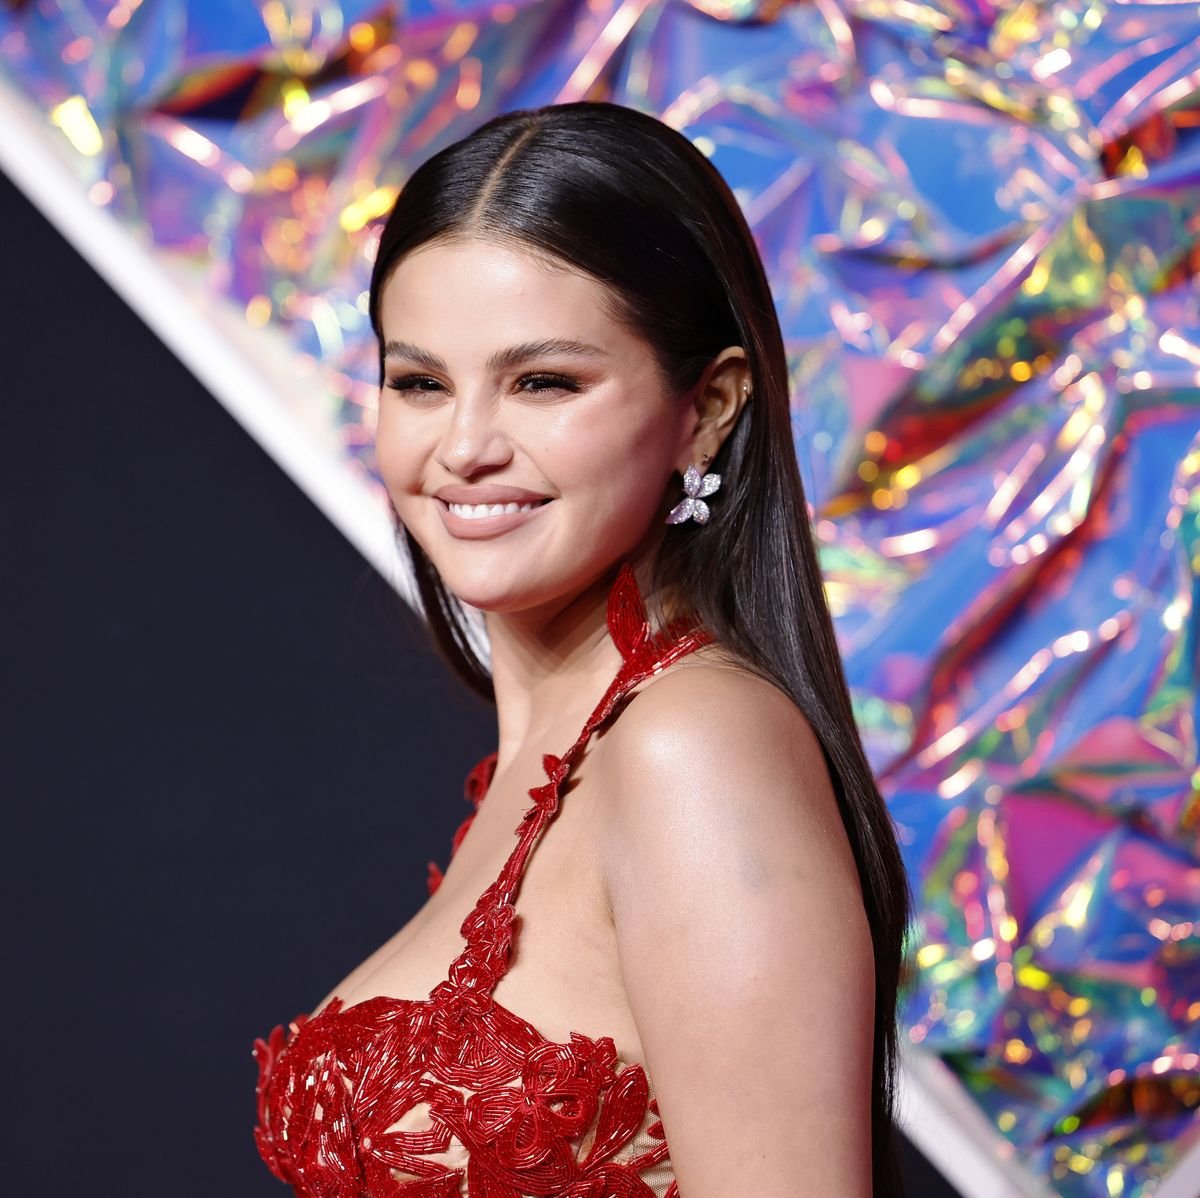 Selena's Gone Rogue! Another day, another Selena Gomez meltdown on social  media this time about Benny Blanco — Scandalous Media